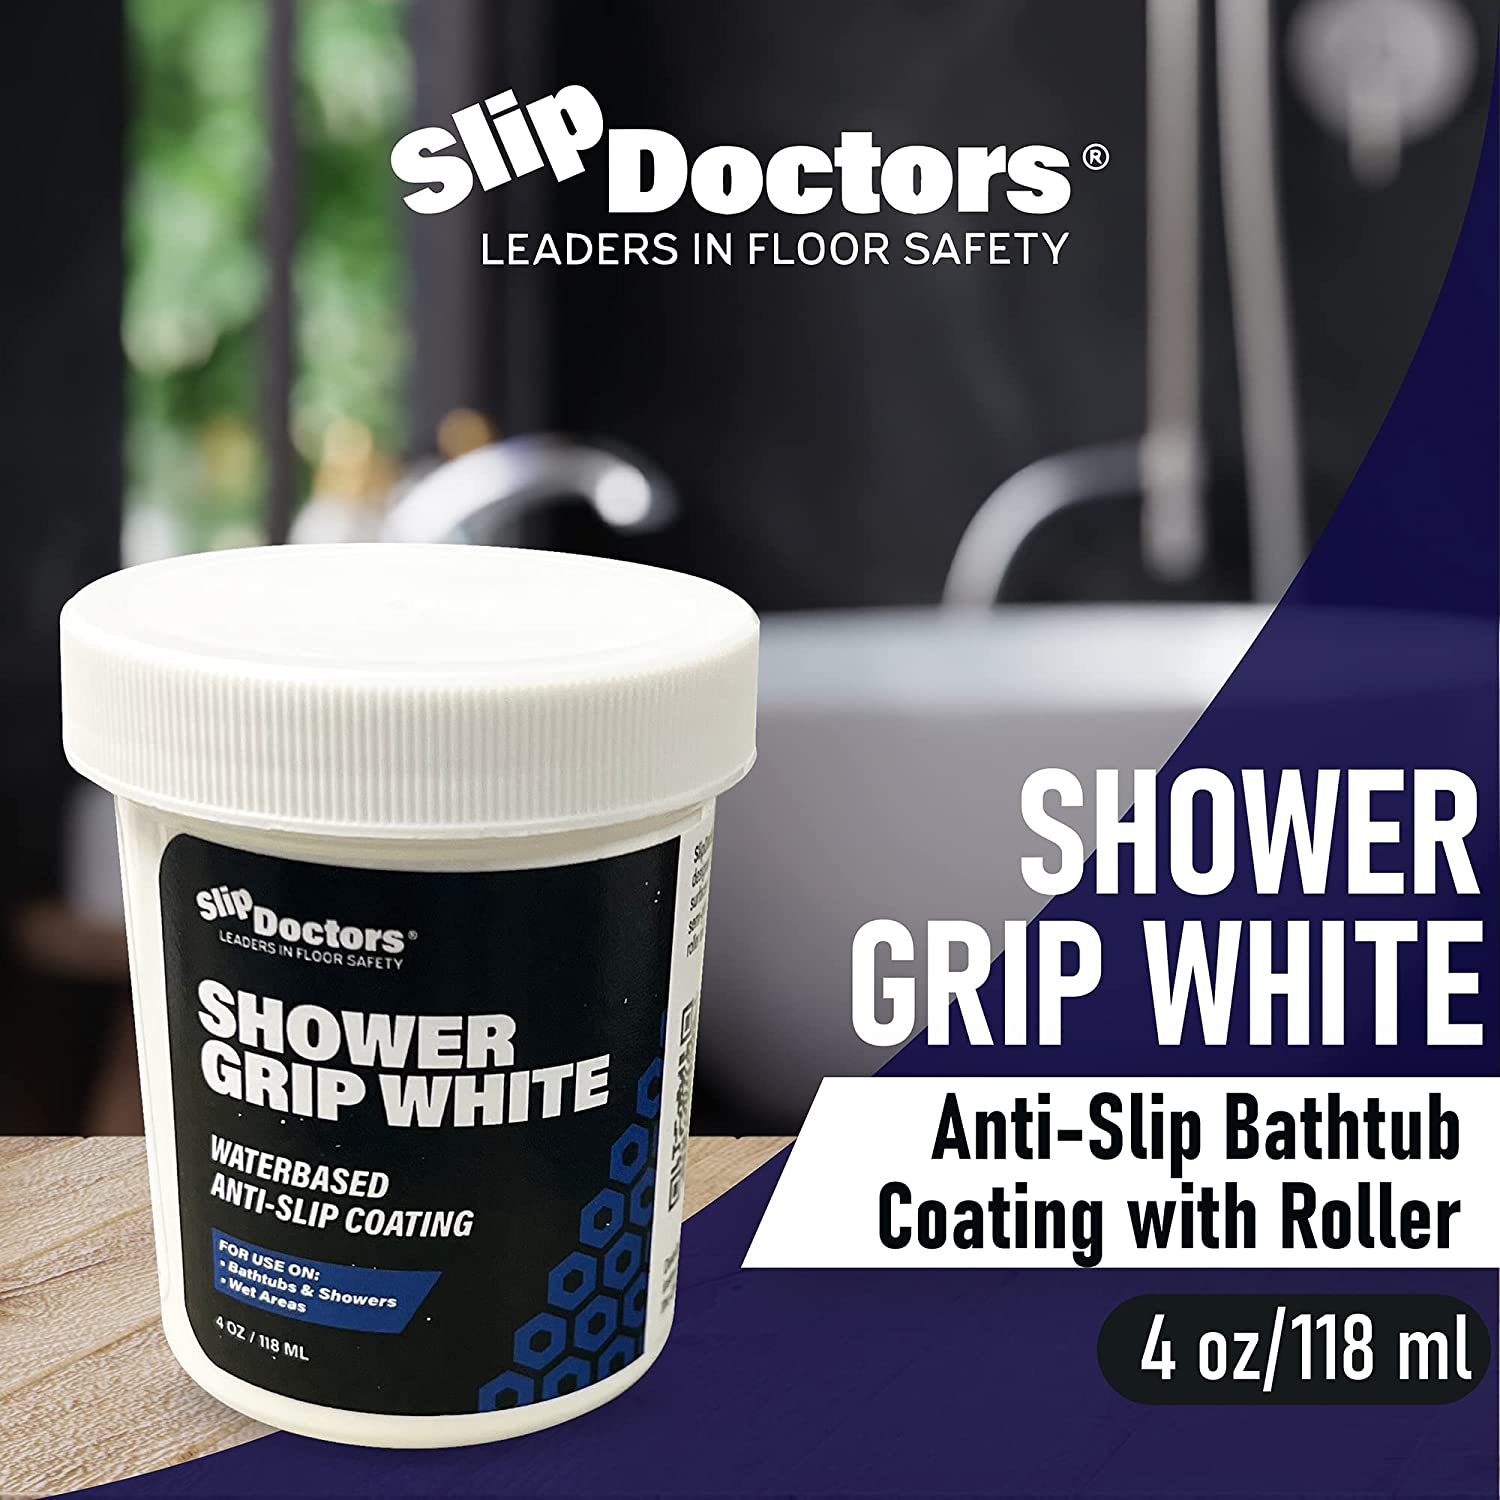 Spa floor + showers with GriP anti-slip Safety Coating.